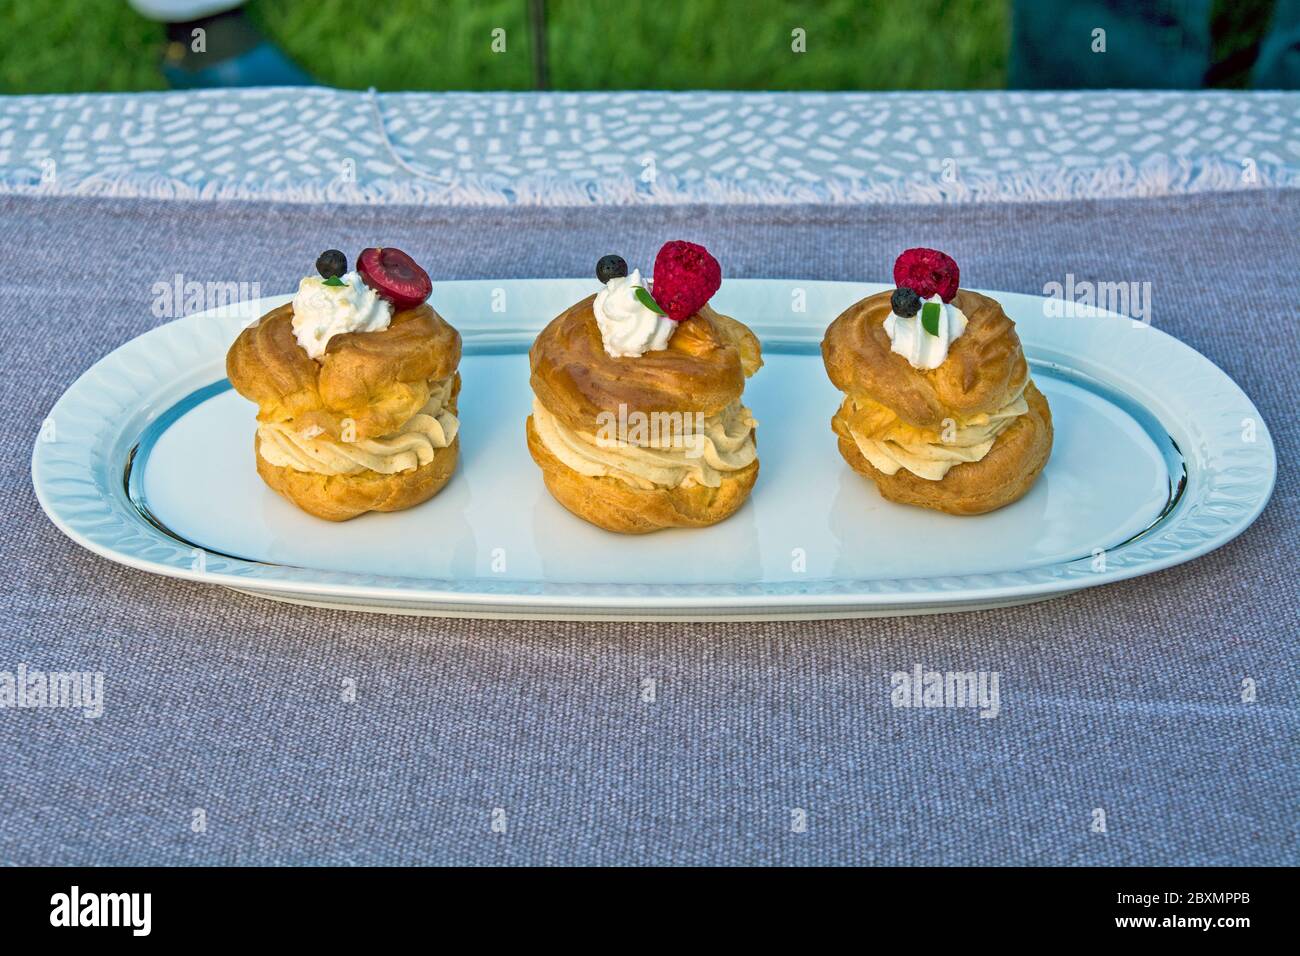 Three princess donuts on a plate with sweet fruit decorations on them. Stock Photo